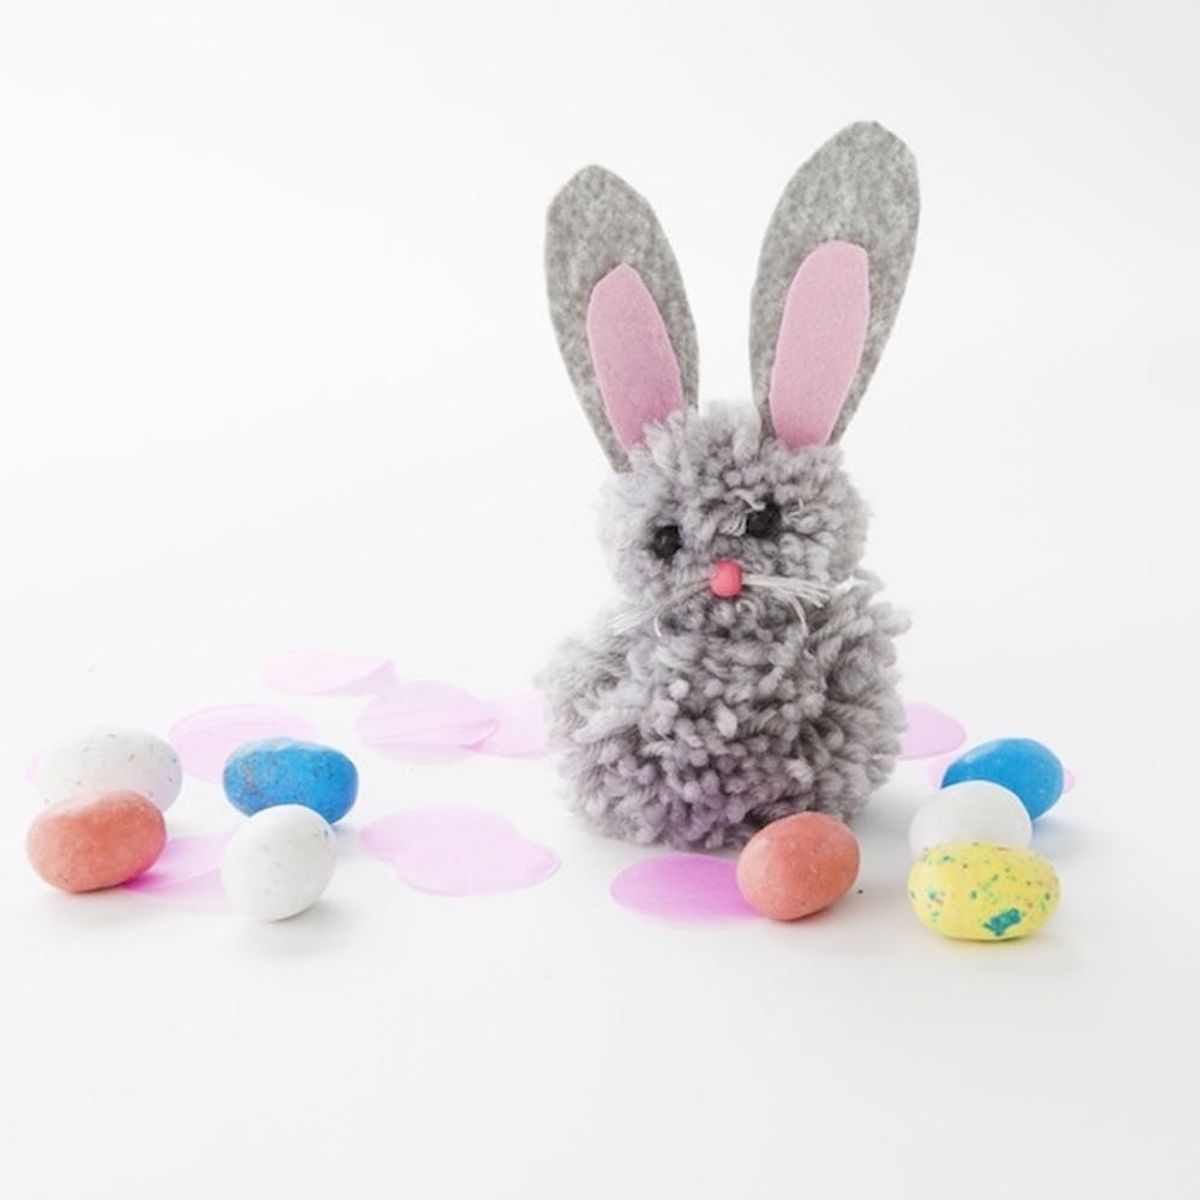 11 Easter Essentials for Every Bunny